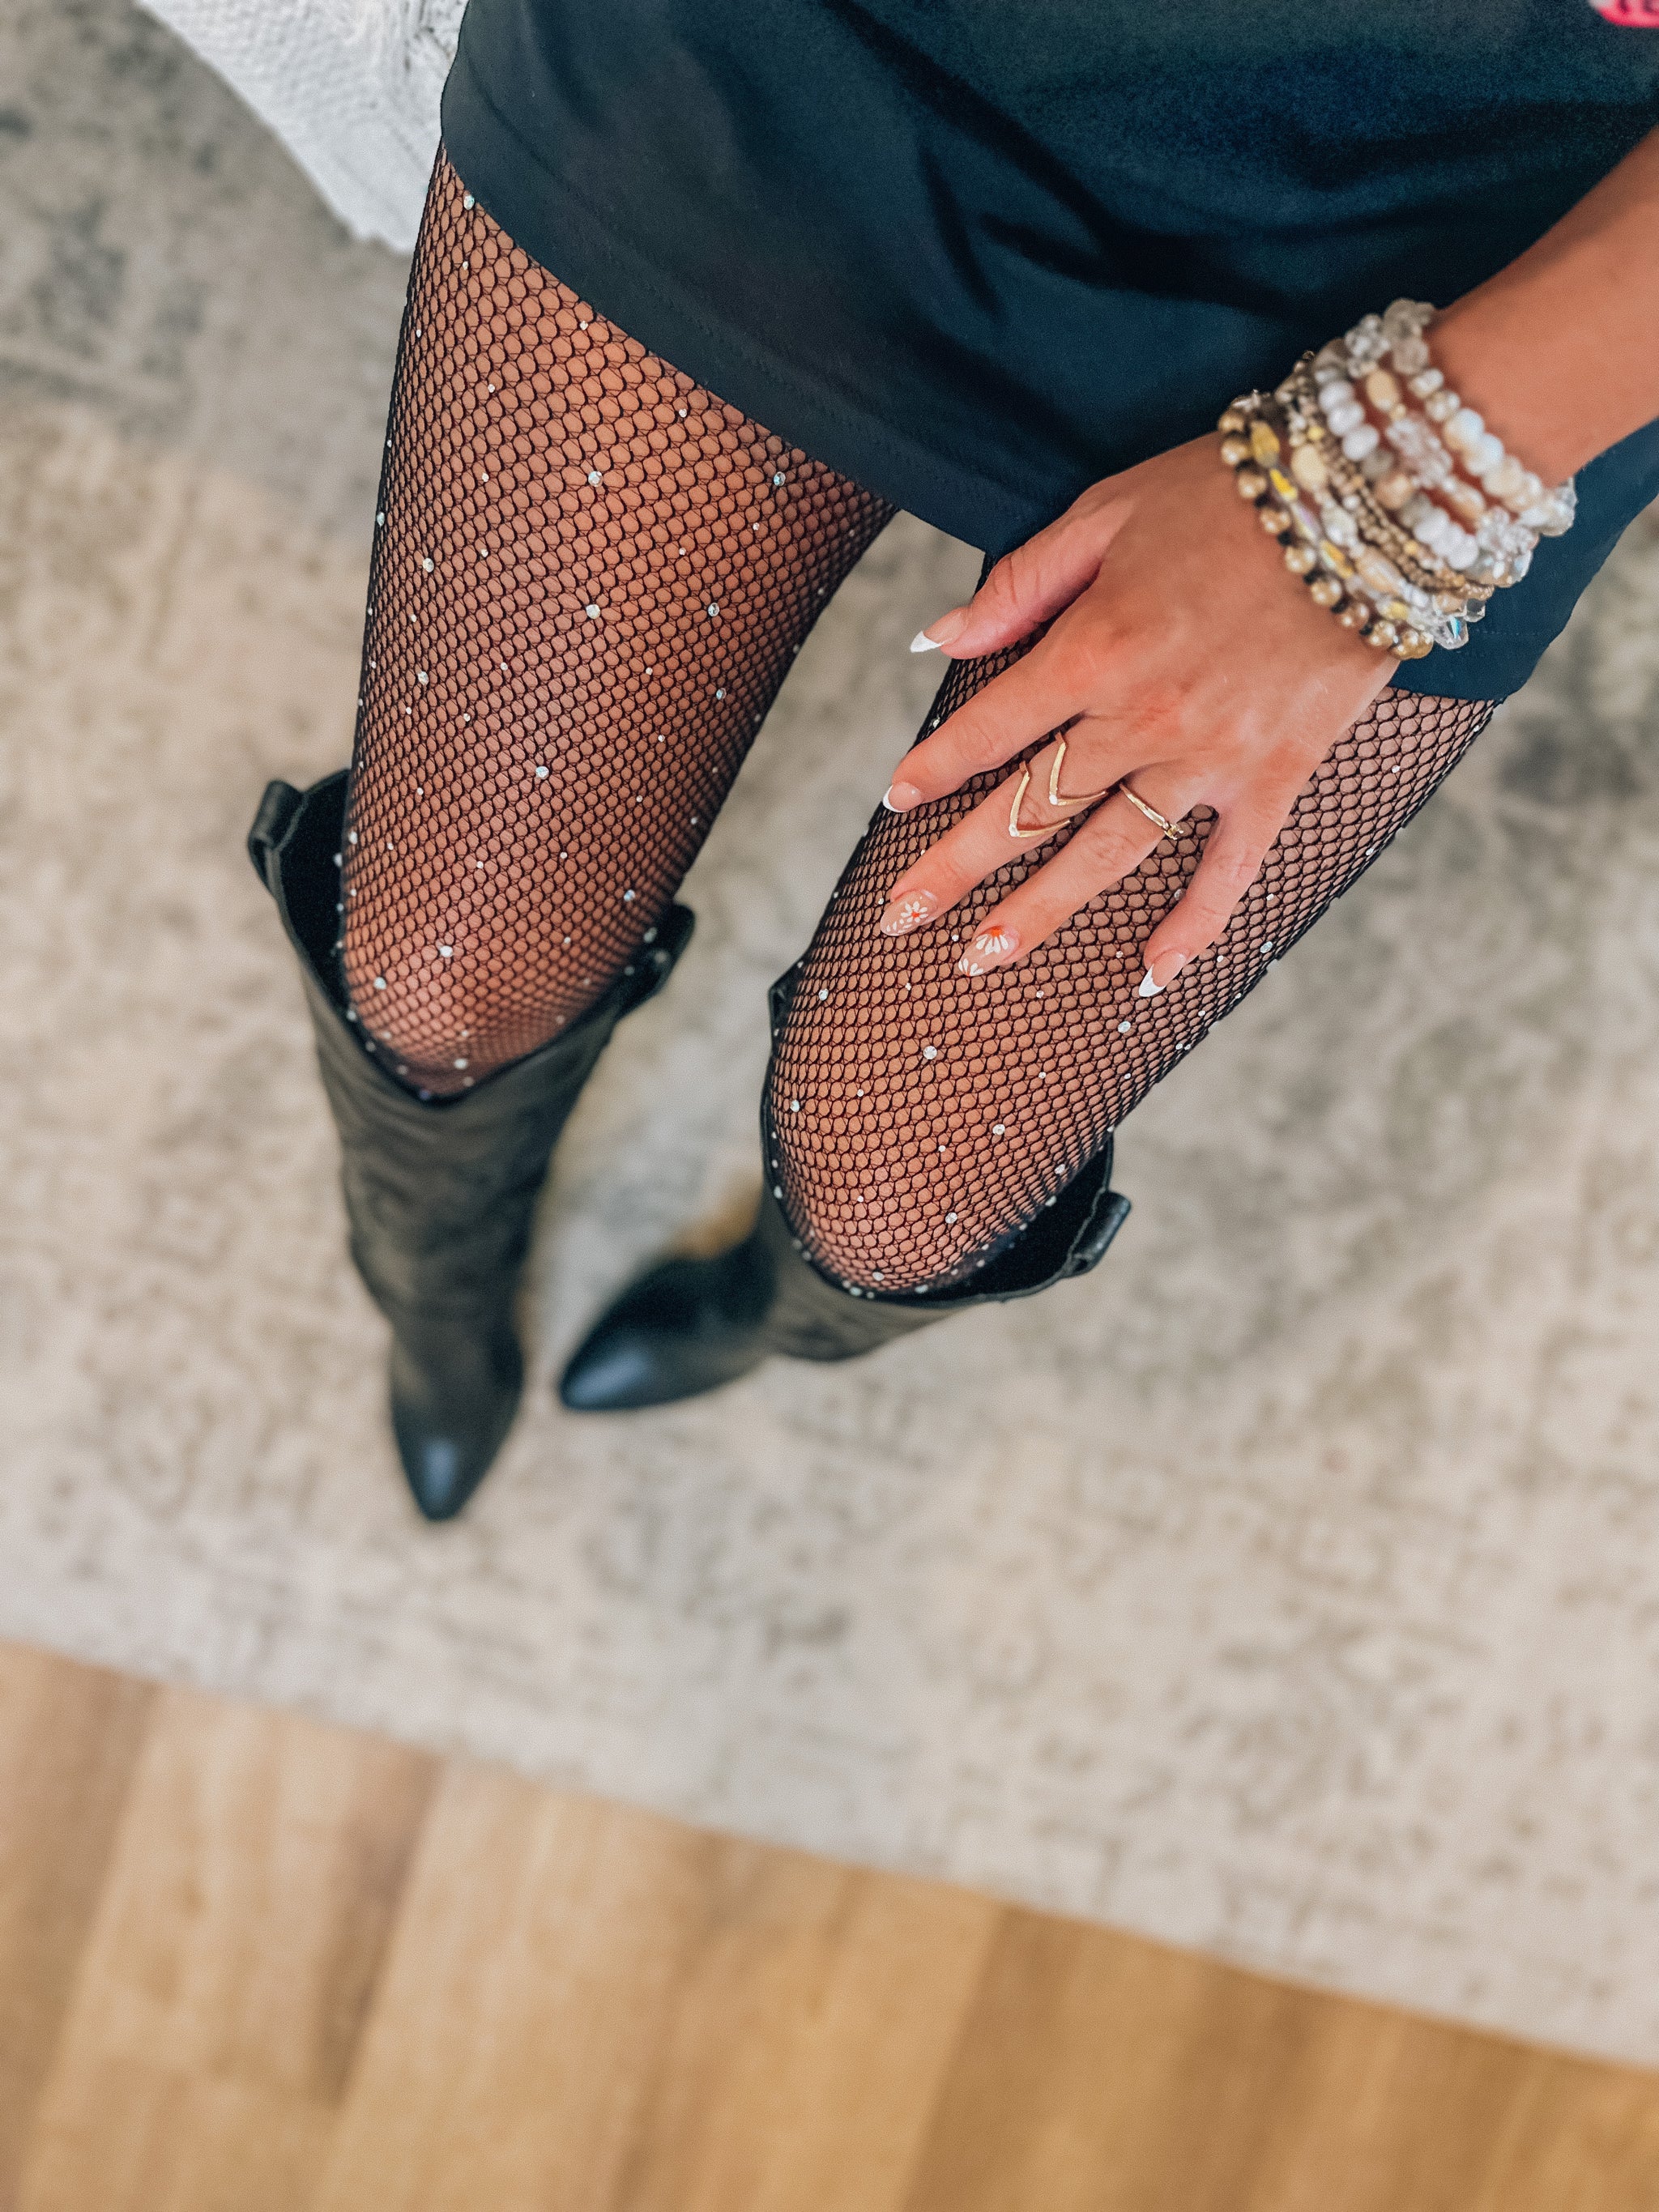 Rhinestone Fishnet Stockings by Micles, Carnival Kicks - Festival Boots,  Shoes and Accessories